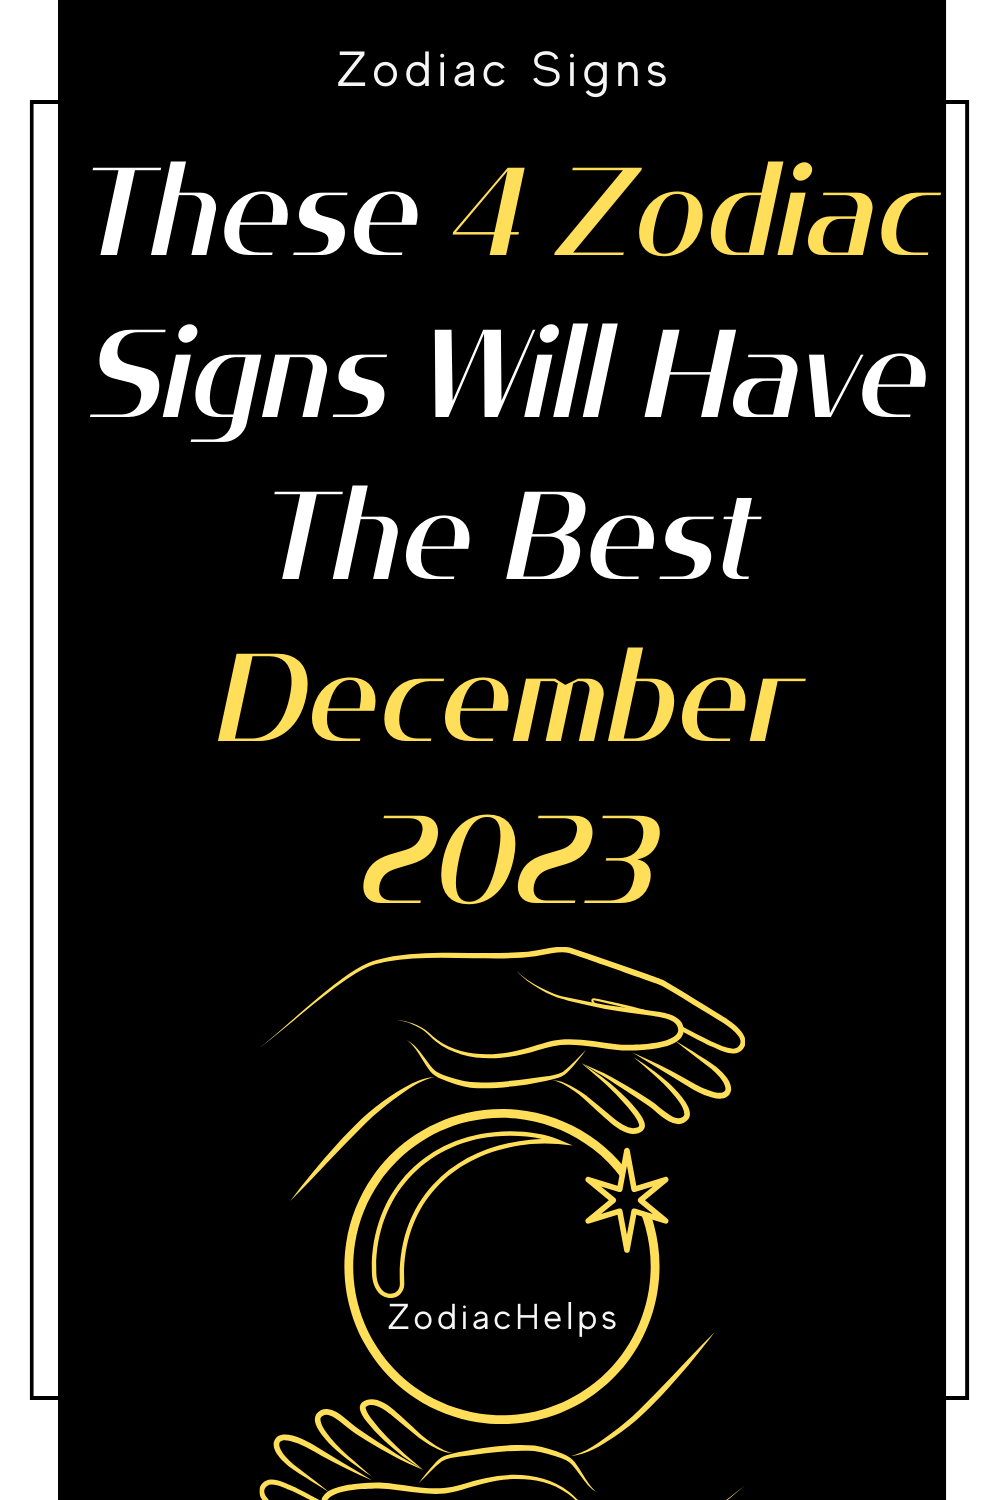 These 4 Zodiac Signs Will Have The Best December 2023